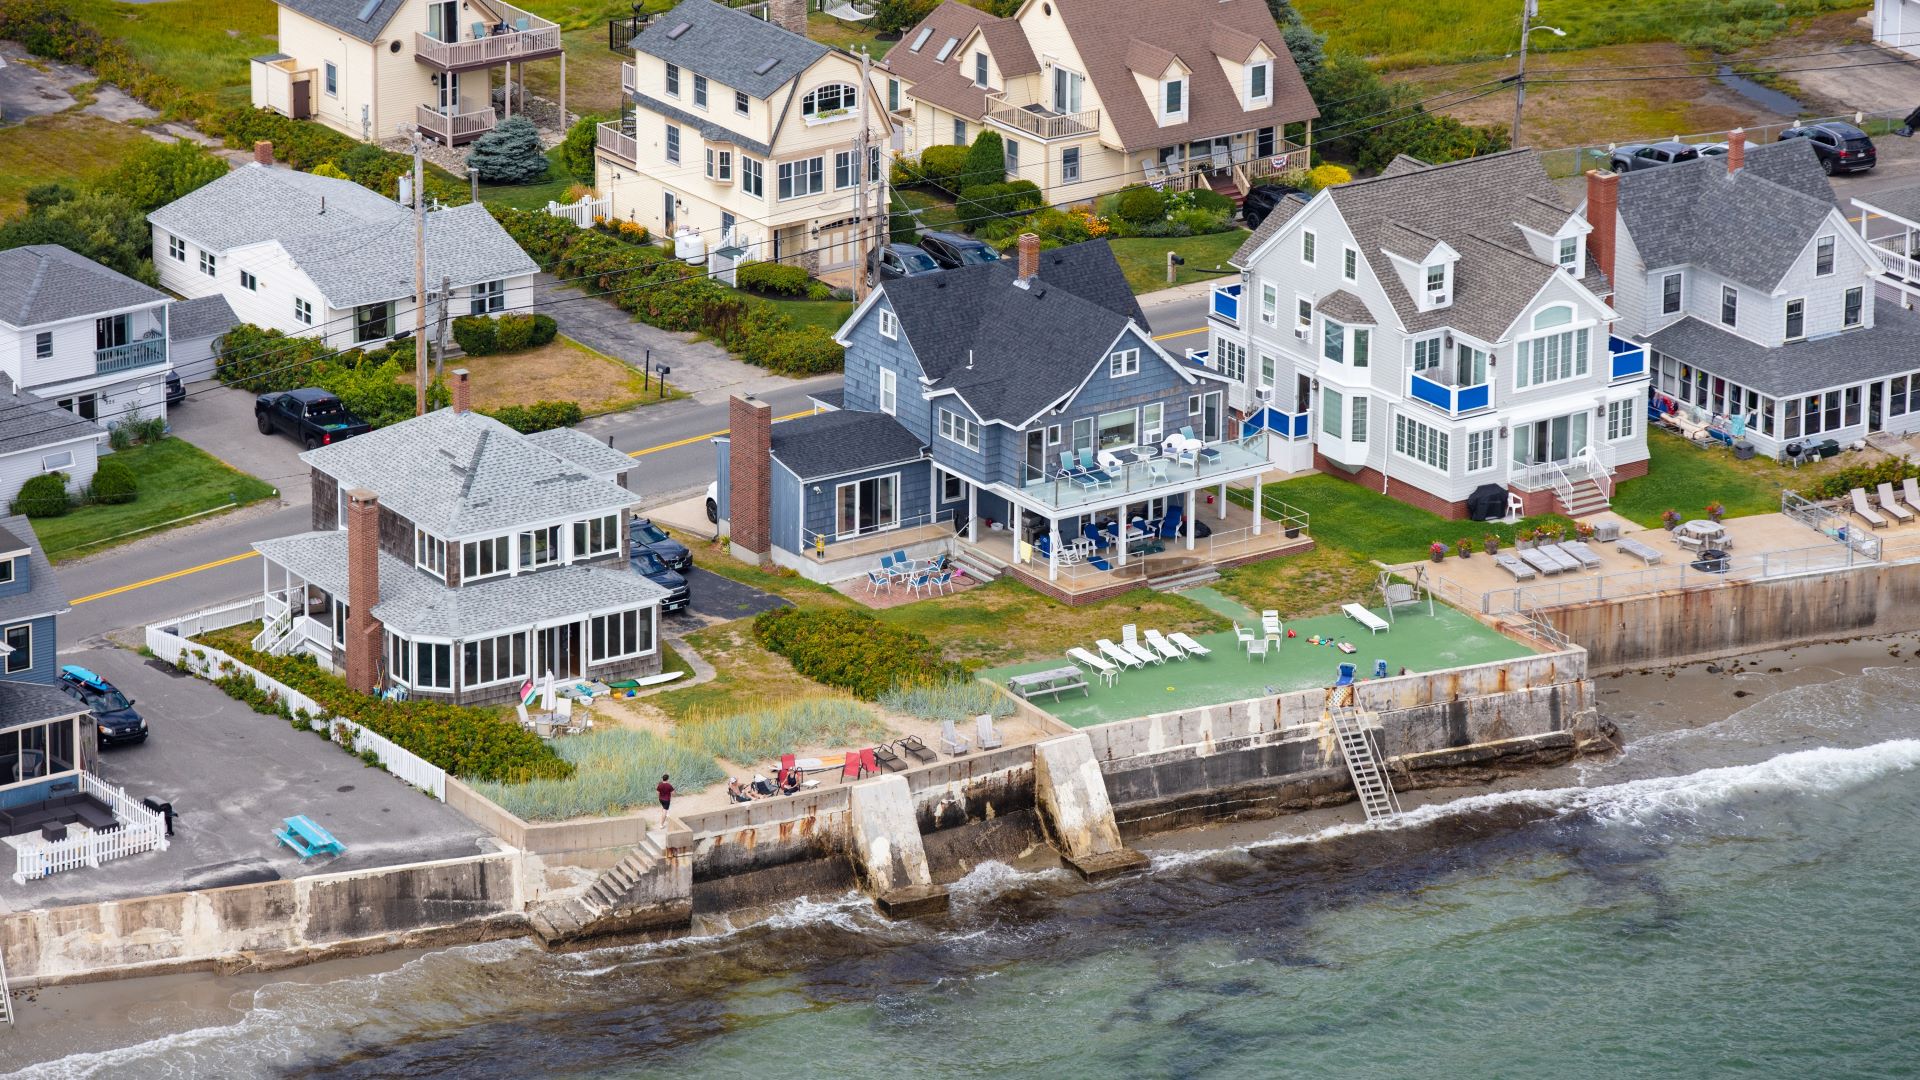 Aerial view of homes in Wells that are protected by seawall and their lawn